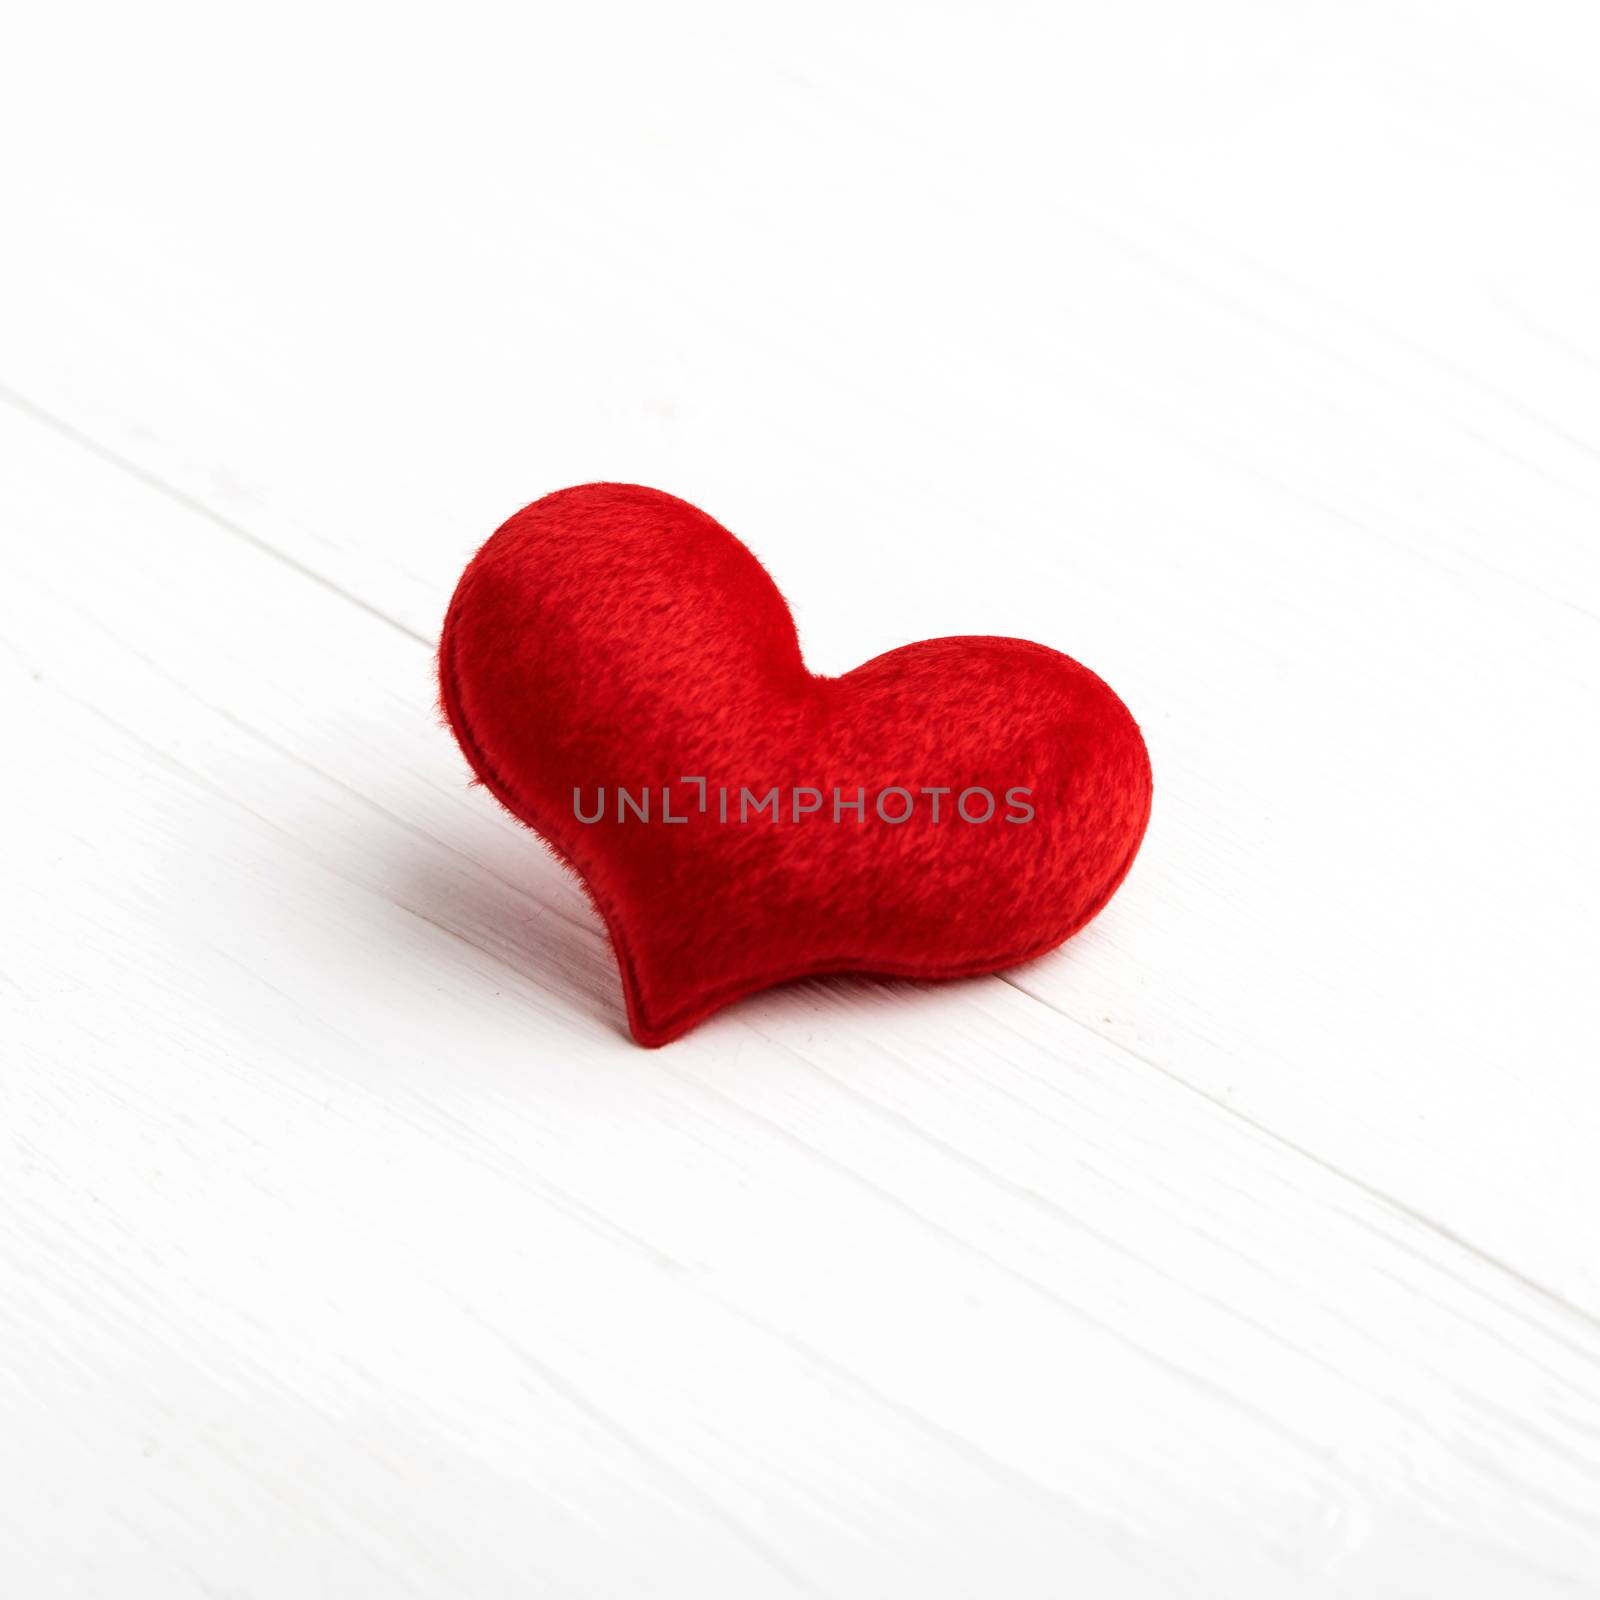 red heart on white table